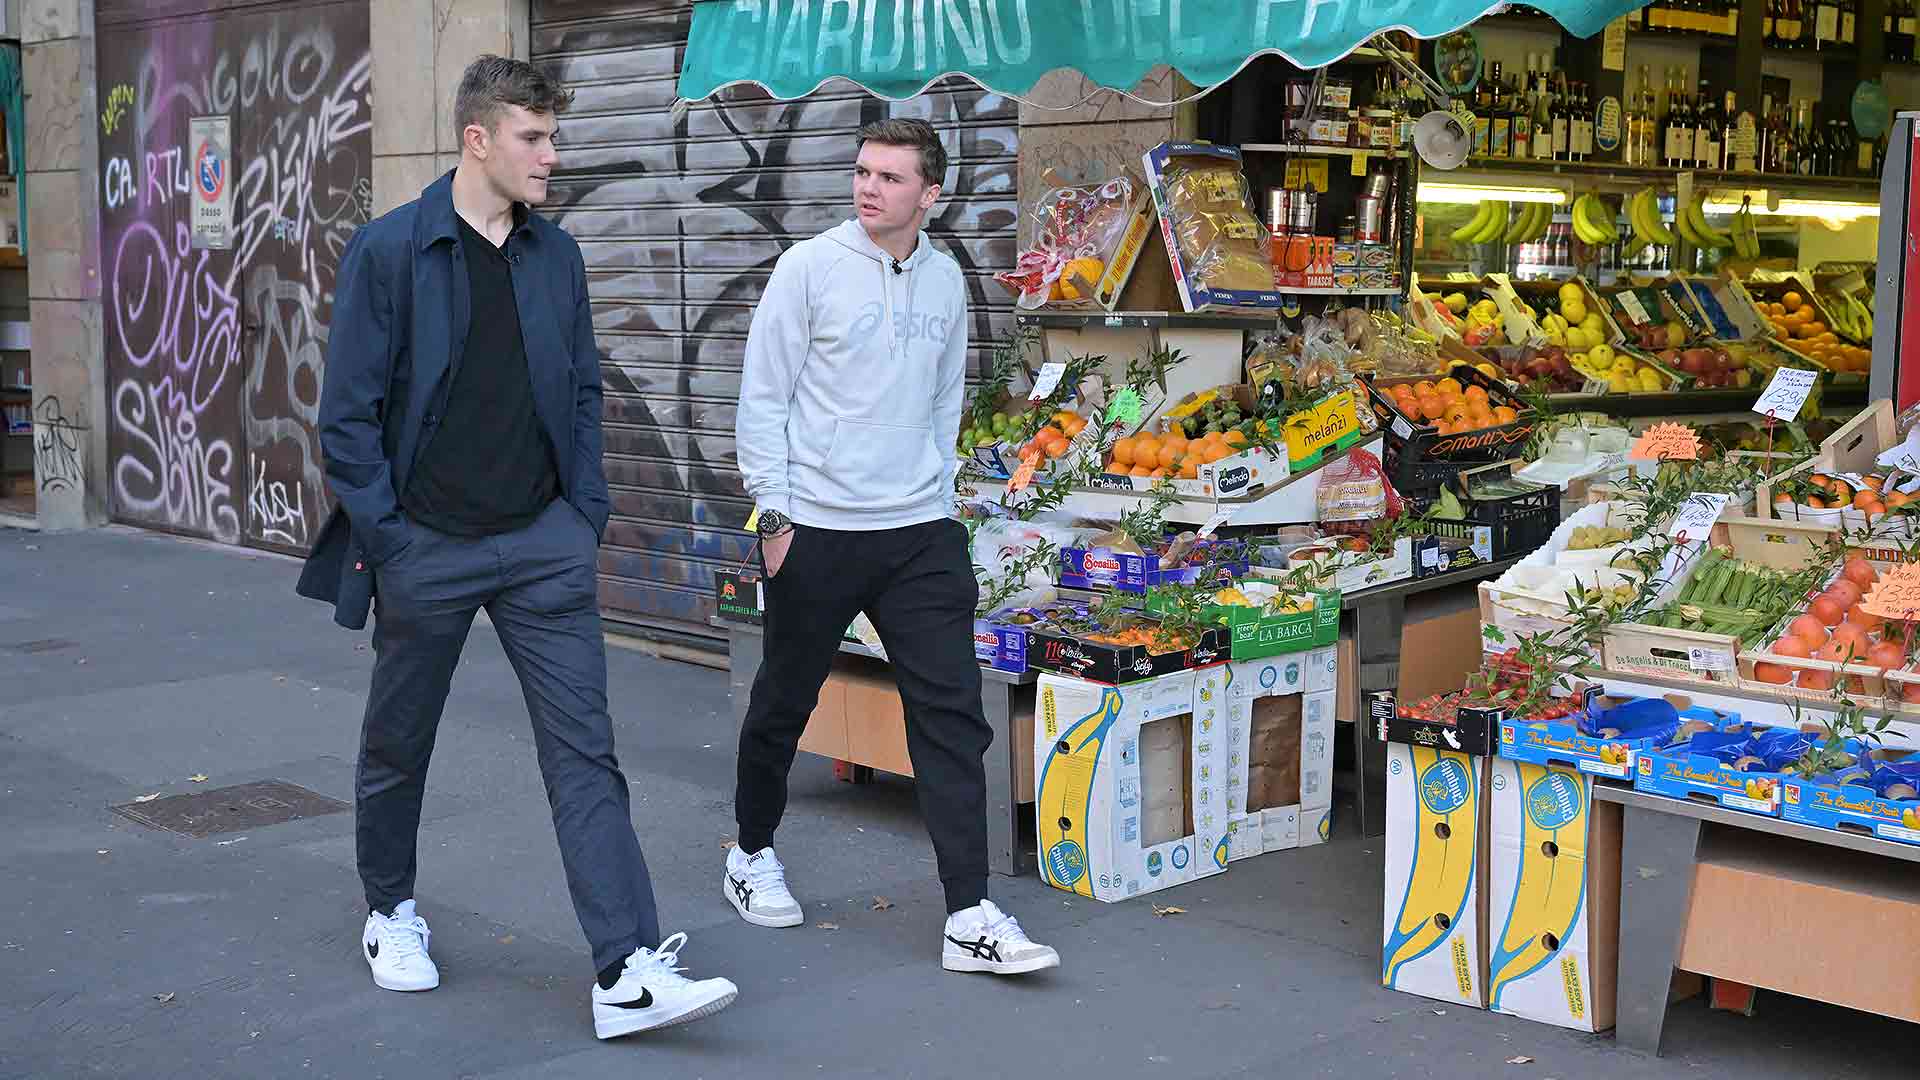 Jack Draper and Dominic Stricker go for a walk and a chat in Milan.